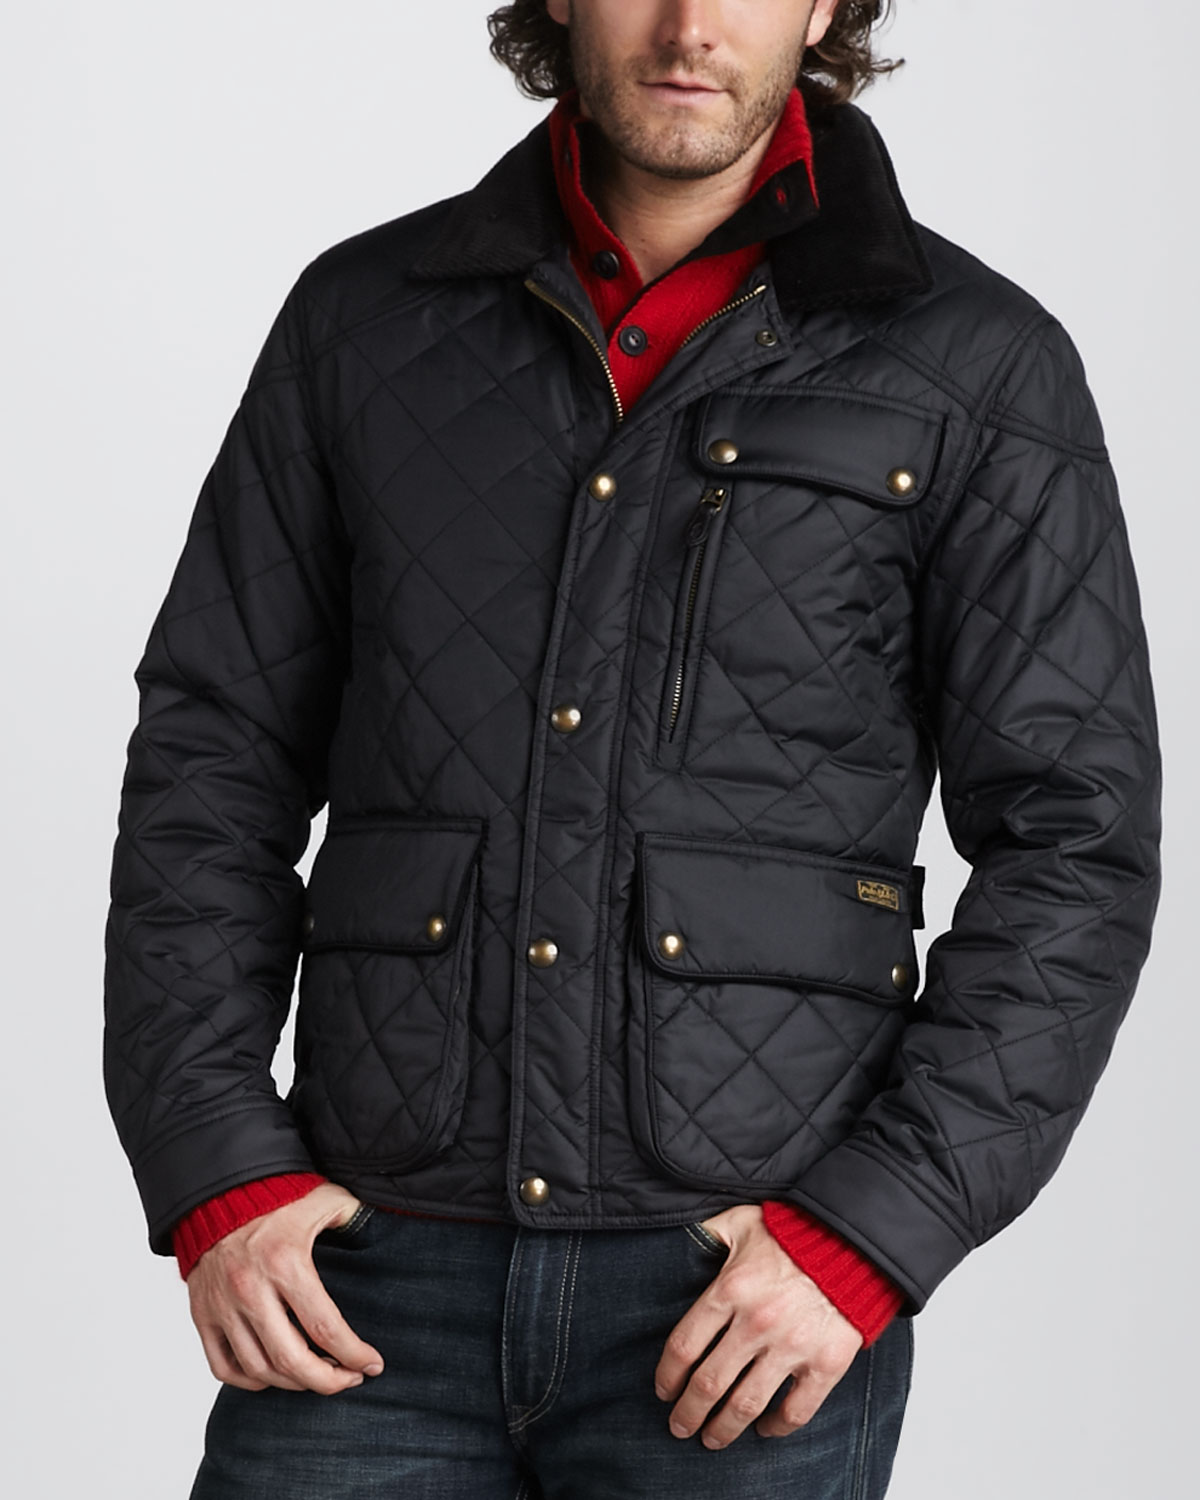 Lyst - Polo Ralph Lauren Quilted Bomber Jacket in Black for Men